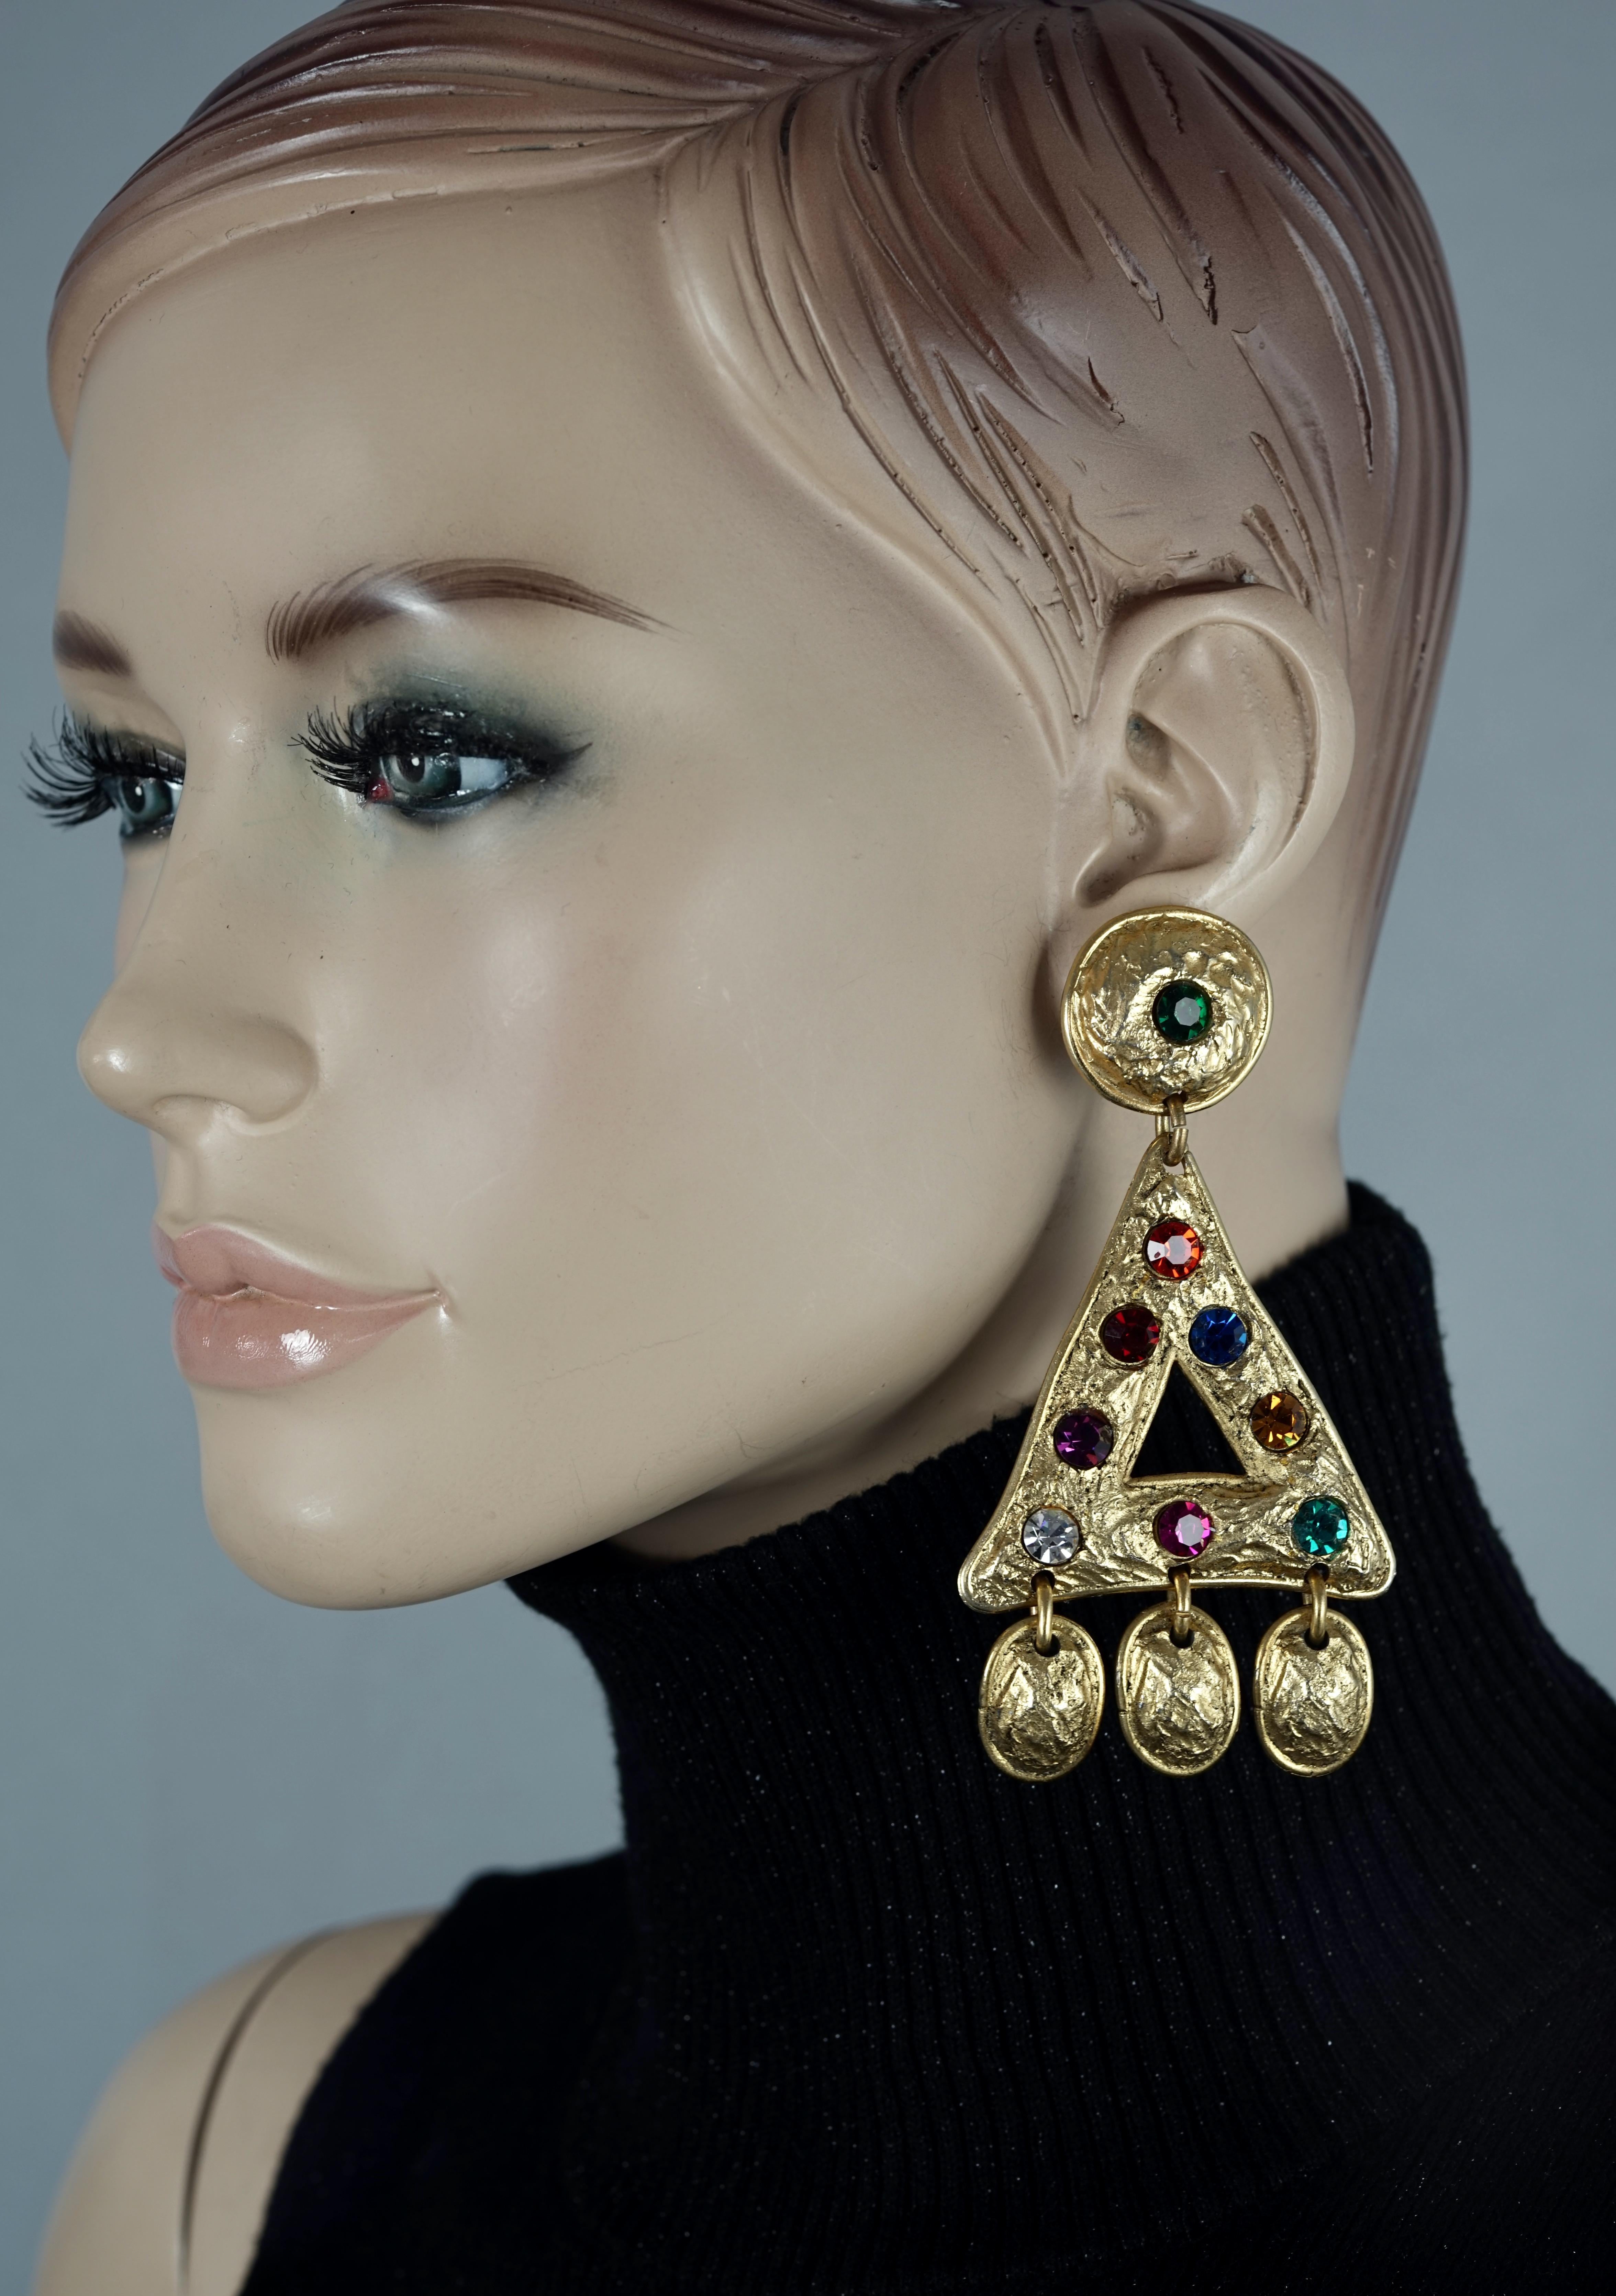 Vintage EDOUARD RAMBAUD Byzantine Hammered Geometric Rhinestone Earrings

Measurements:
Height: 3.94 inches (10 cm)
Width: 2.16 inches (5.5 cm)
Weight: 38 grams

Features:
- 100% Authentic EDOUARD RAMBAUD.
- Massive hammered geometric earrings